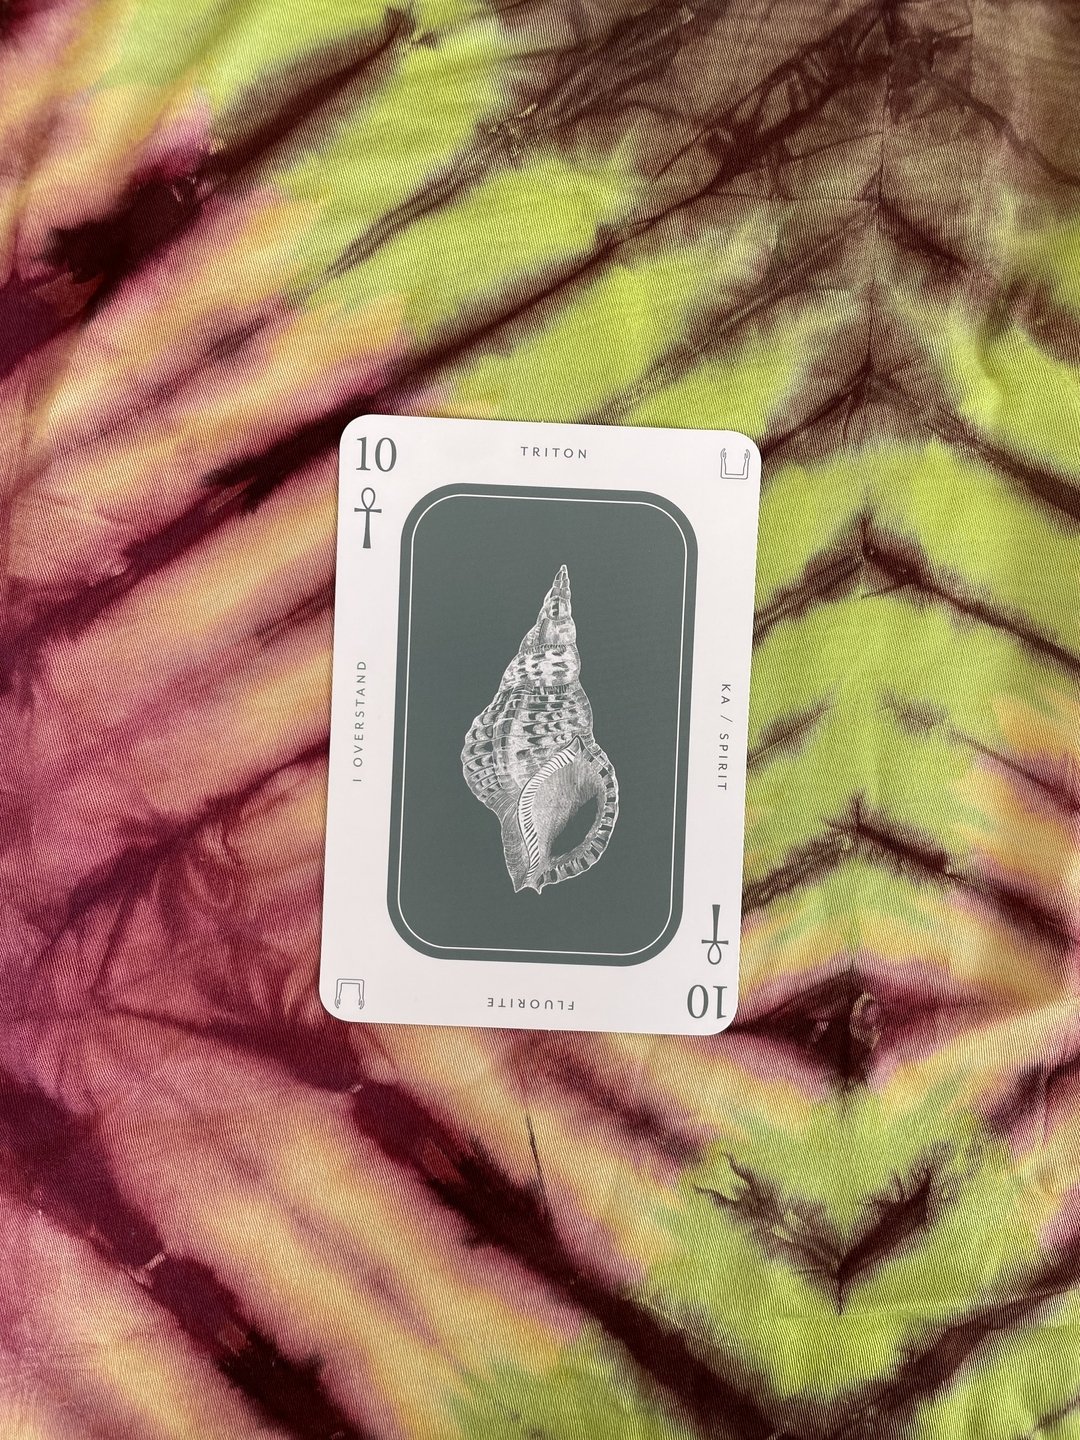 KA &middot; THE DIVINE SELF
✨
The #triton spiral supports you in standing by your clear choices. It helps you express your choices to others with certainty and with confidence. It clears the tendency to second-guess and doubt yourself. It allows you 